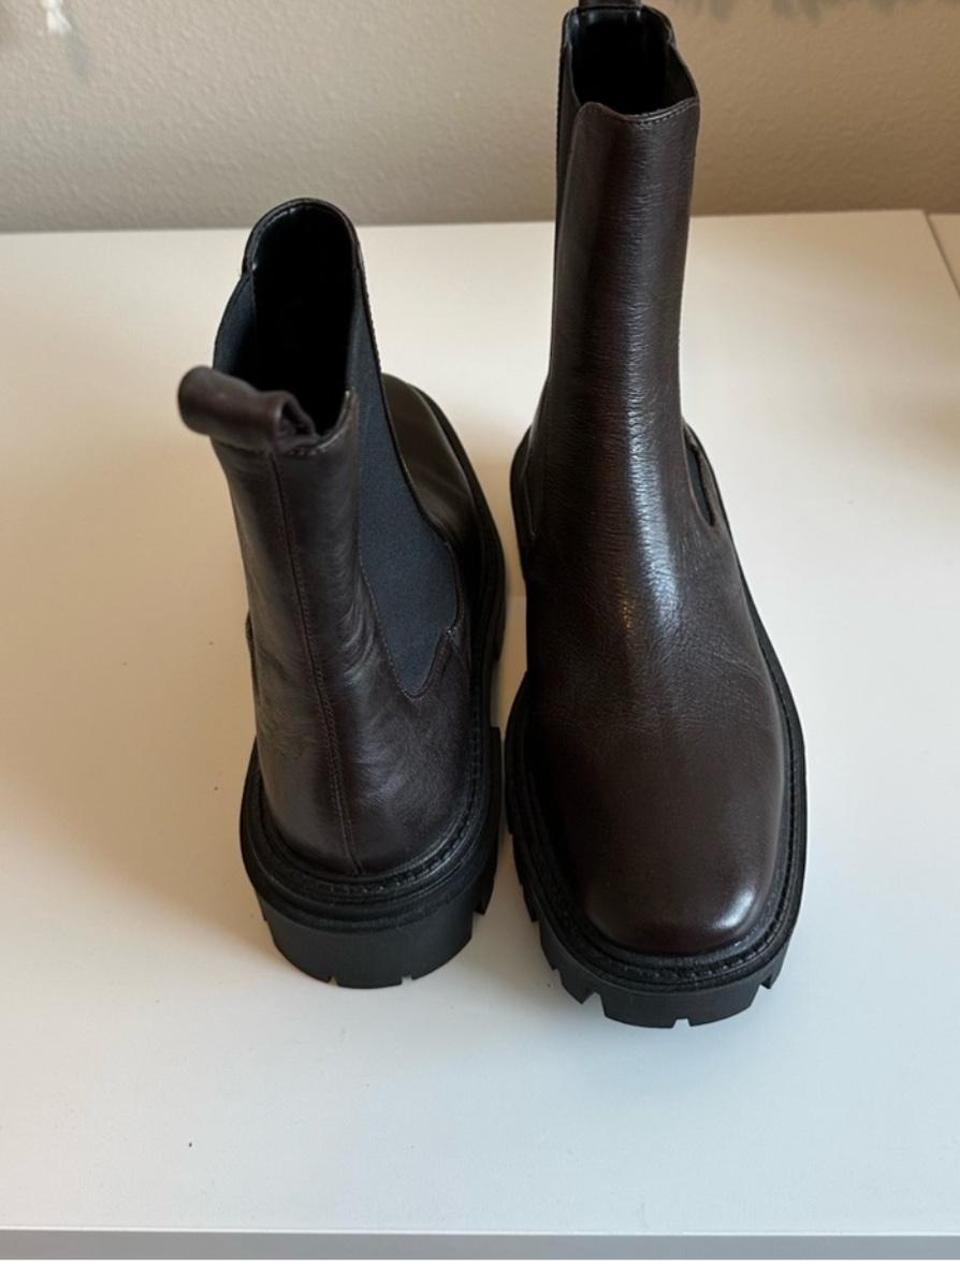 Zara Brown Boots - Size 10. Brand new without tags! - Depop